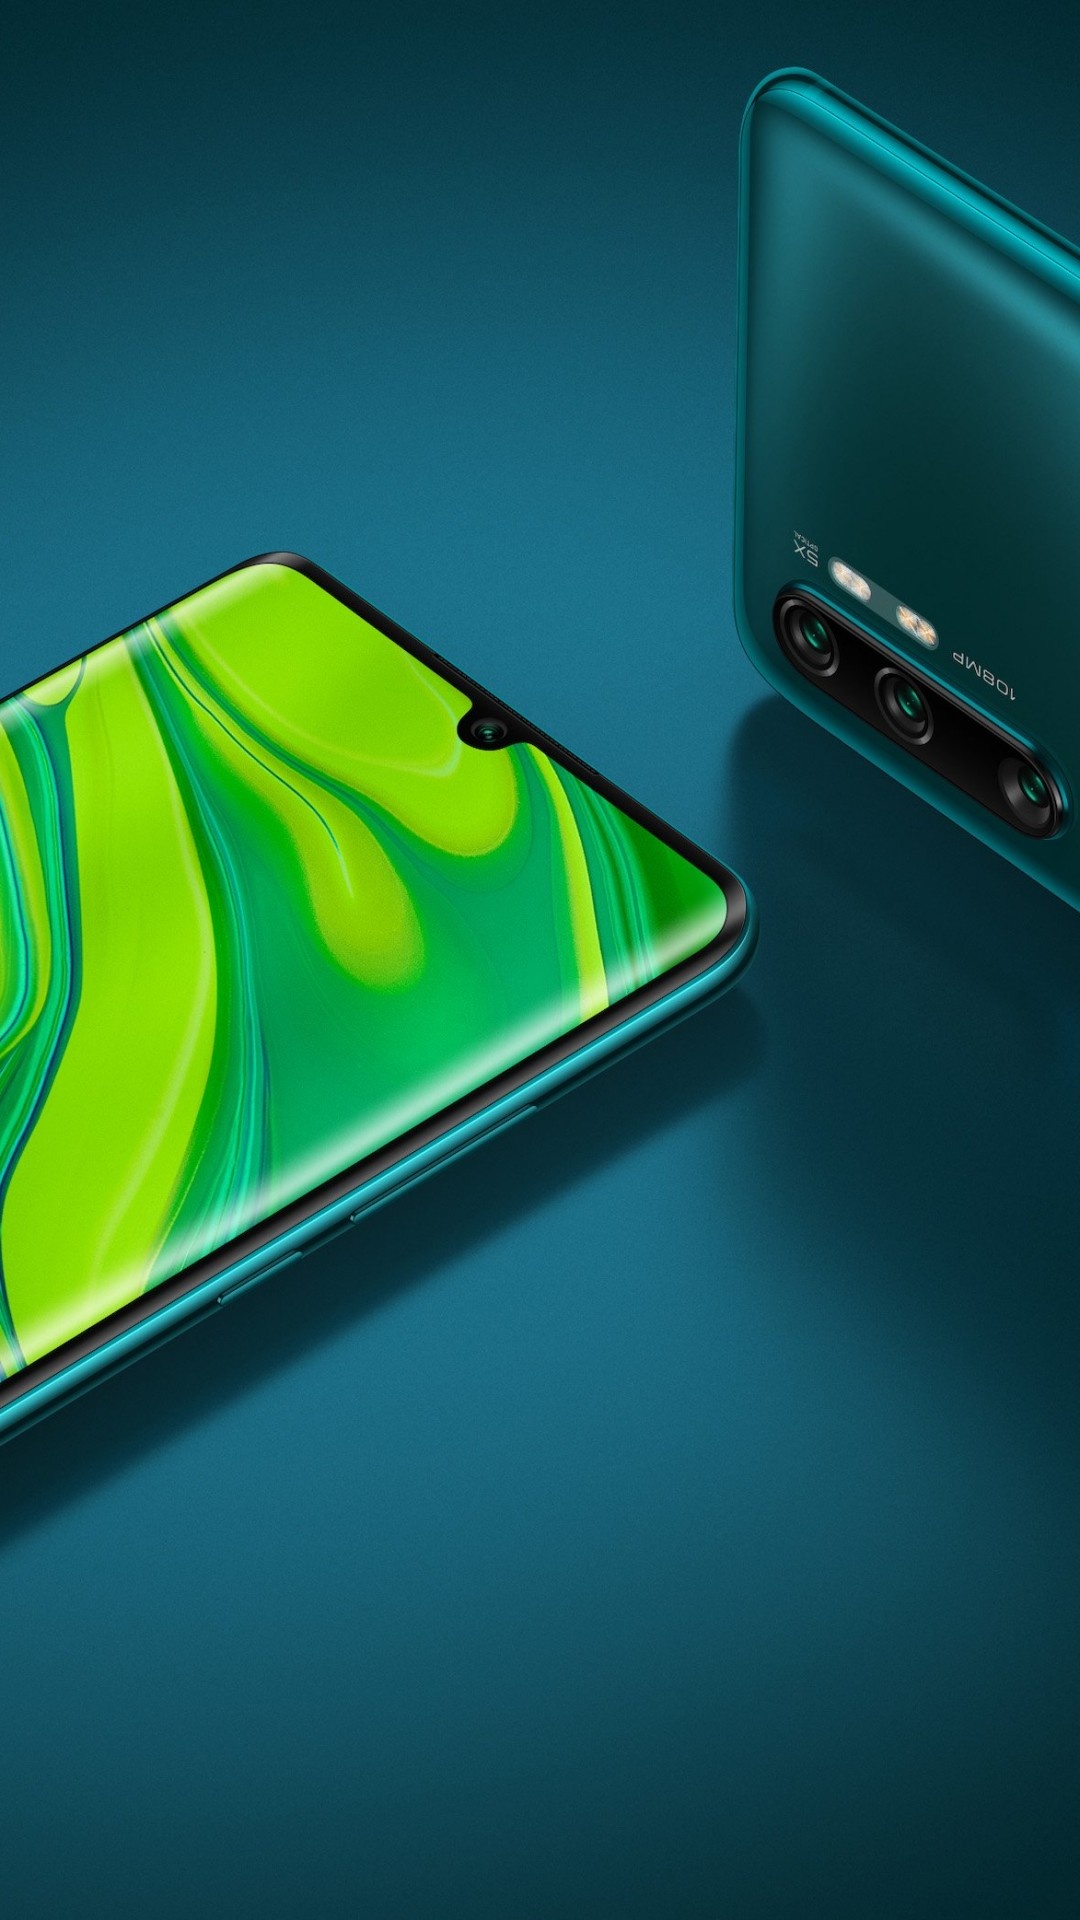 Xiaomi: Xiaomi Mi CC9 Pro, The world's first commercially available phone with a 108 MP primary camera. 1080x1920 Full HD Wallpaper.